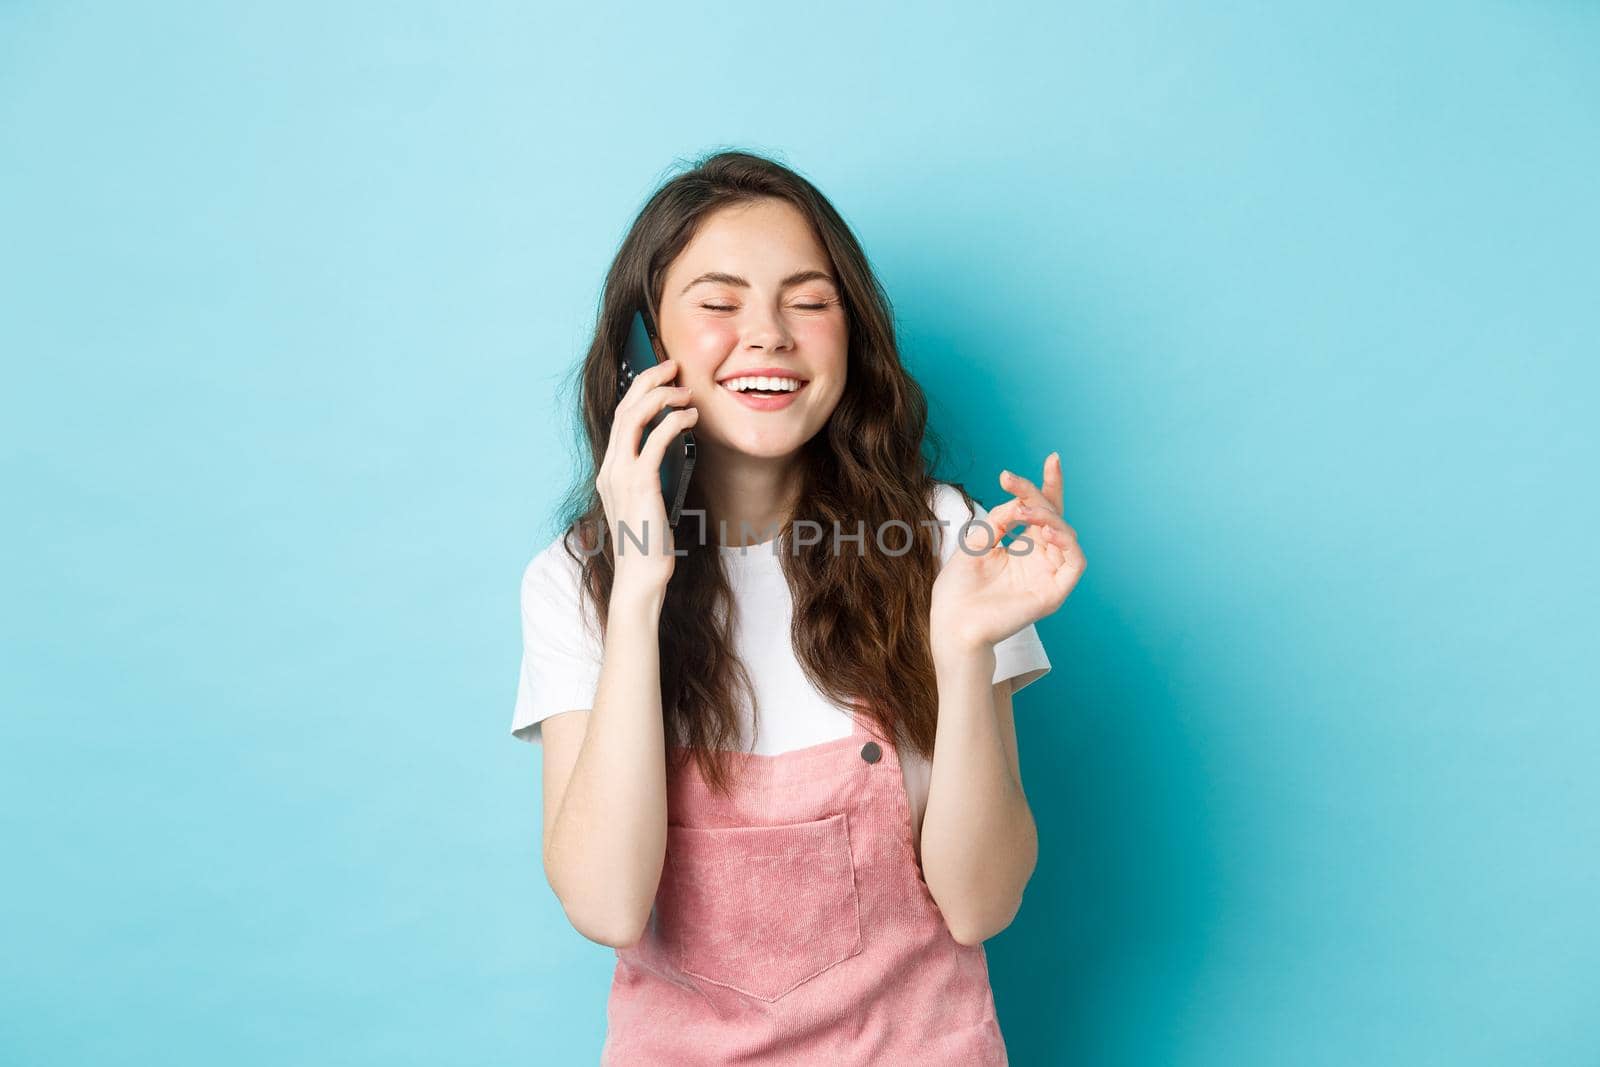 Portrait of cute and stylish girl laughing while chatting on phone, holding smartphone near ear and smiling happy, having casual conversation, standing over blue background.